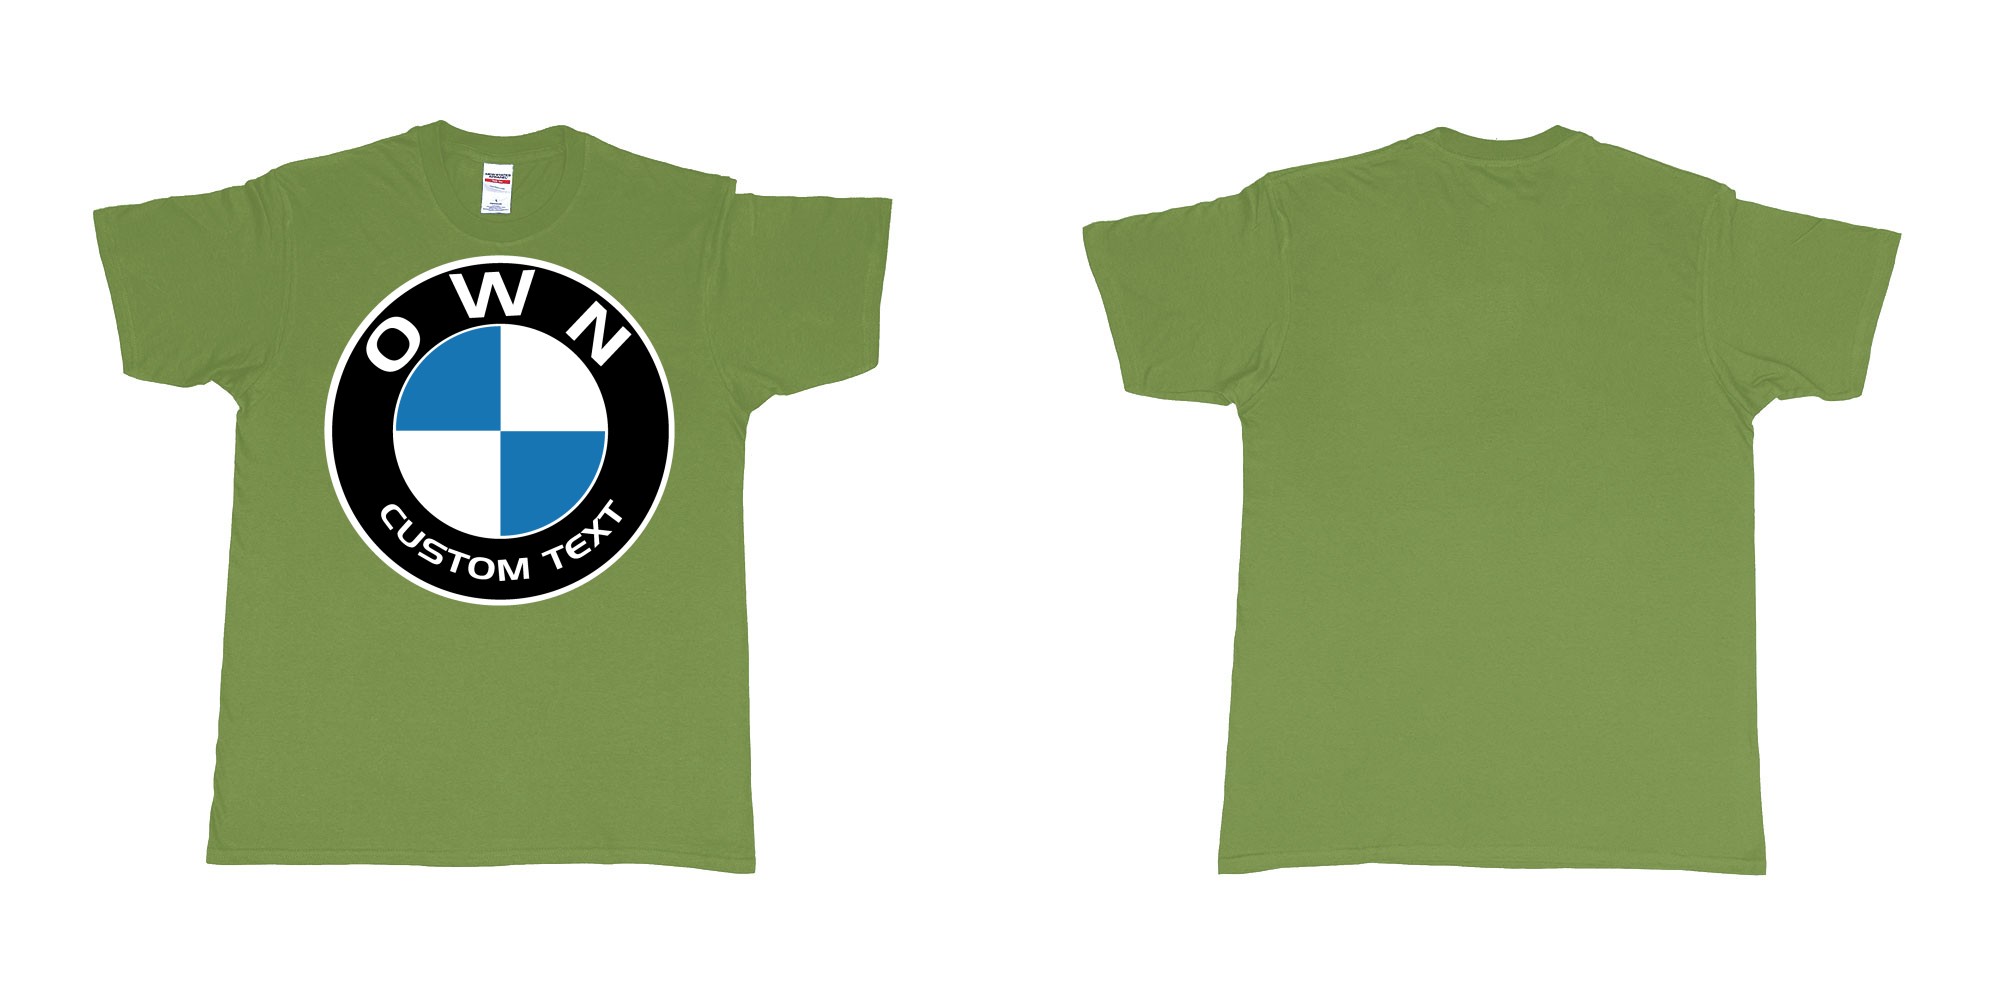 Custom tshirt design BMW logo custom text tshirt printing in fabric color military-green choice your own text made in Bali by The Pirate Way